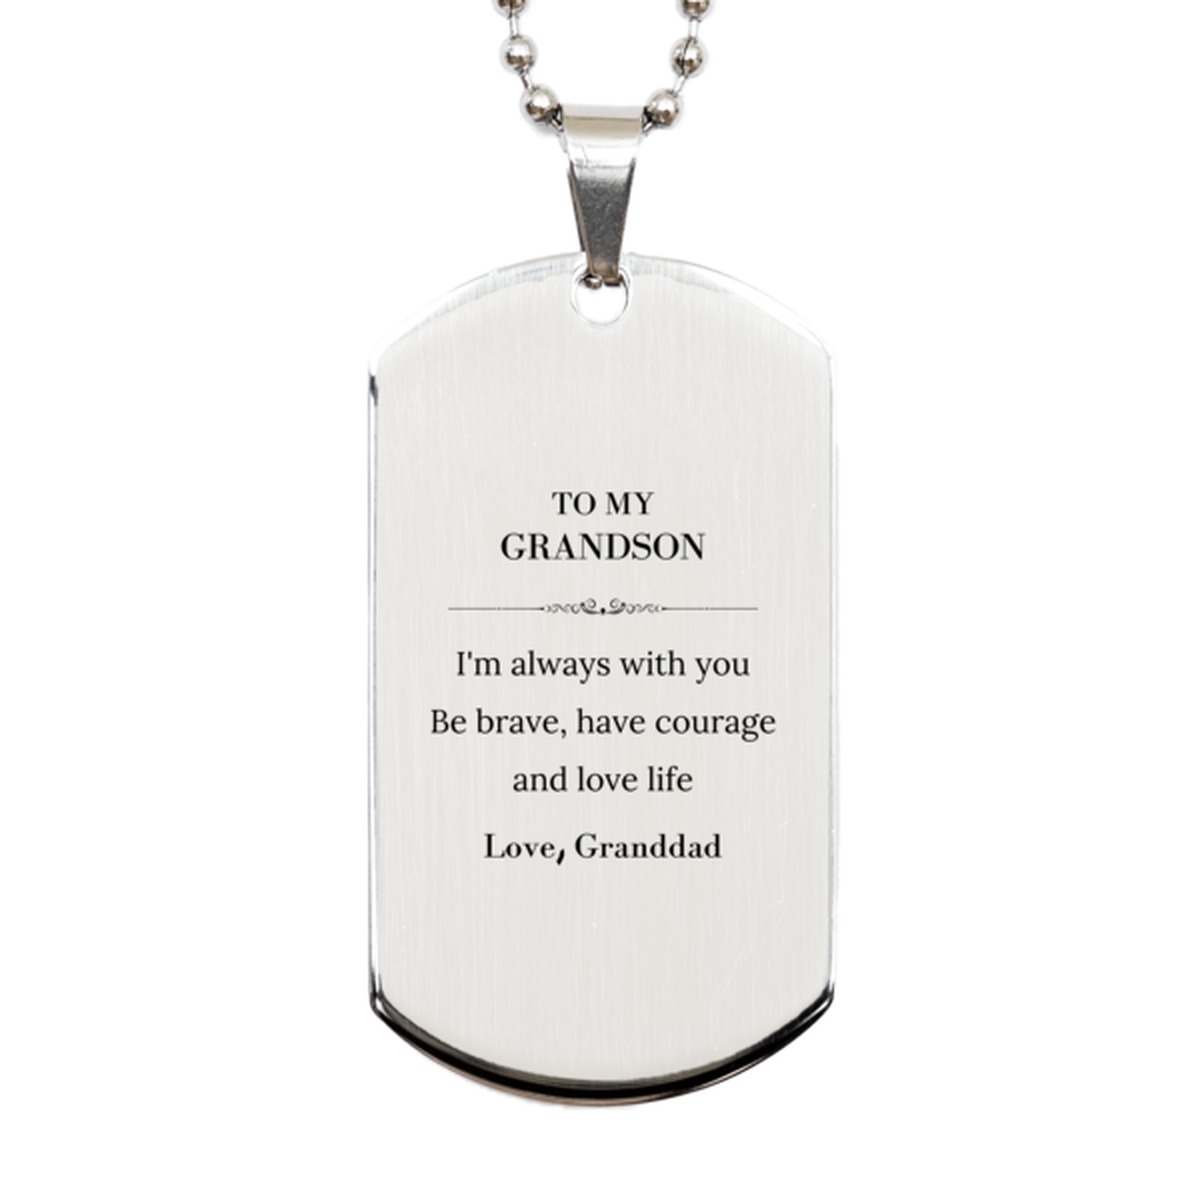 To My Grandson Gifts from Granddad, Unique Silver Dog Tag Inspirational Christmas Birthday Graduation Gifts for Grandson I'm always with you. Be brave, have courage and love life. Love, Granddad